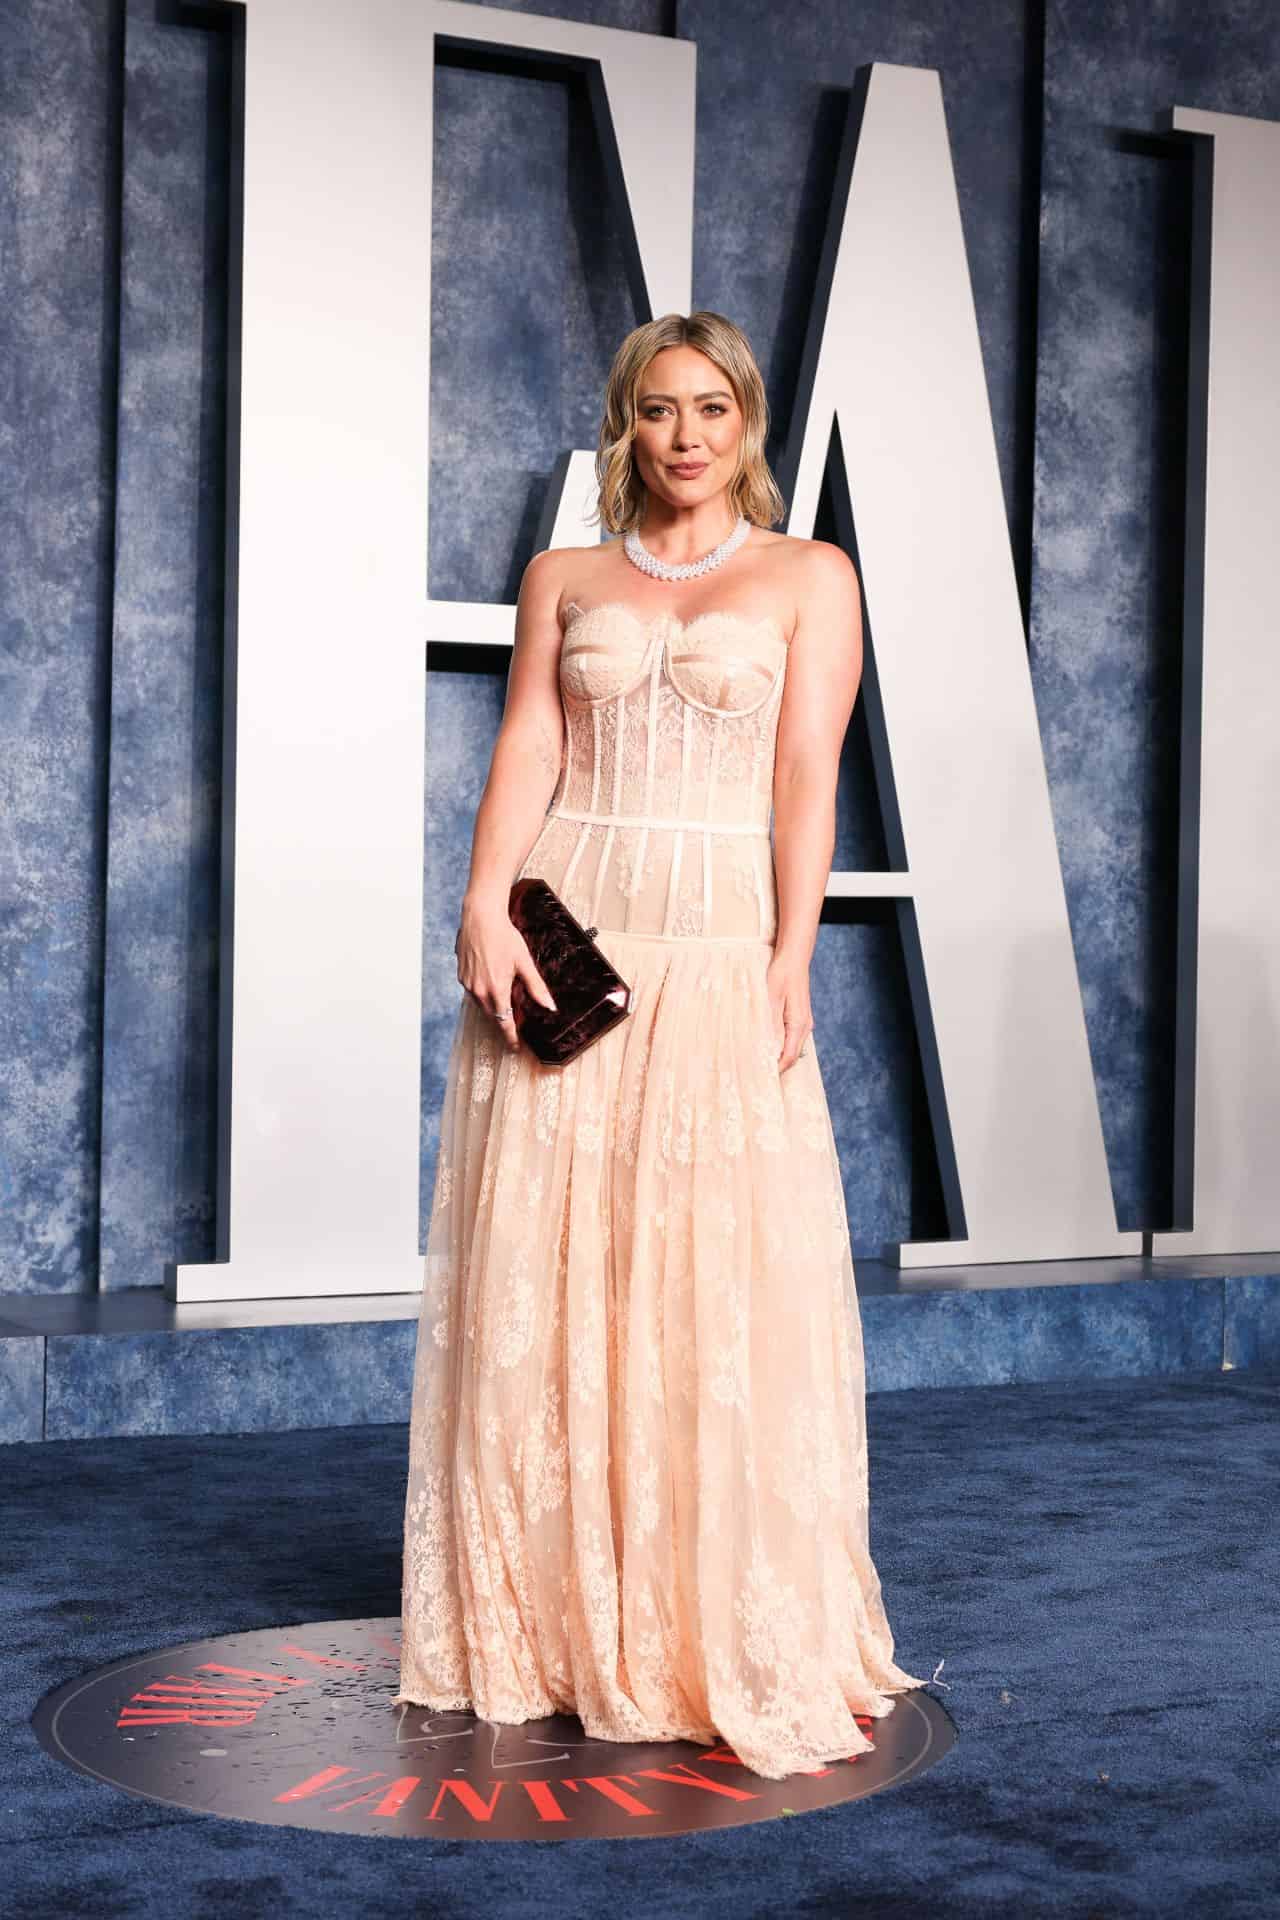 Hilary Duff Stuns in a Peach Gown at the 2023 Vanity Fair Oscars Party